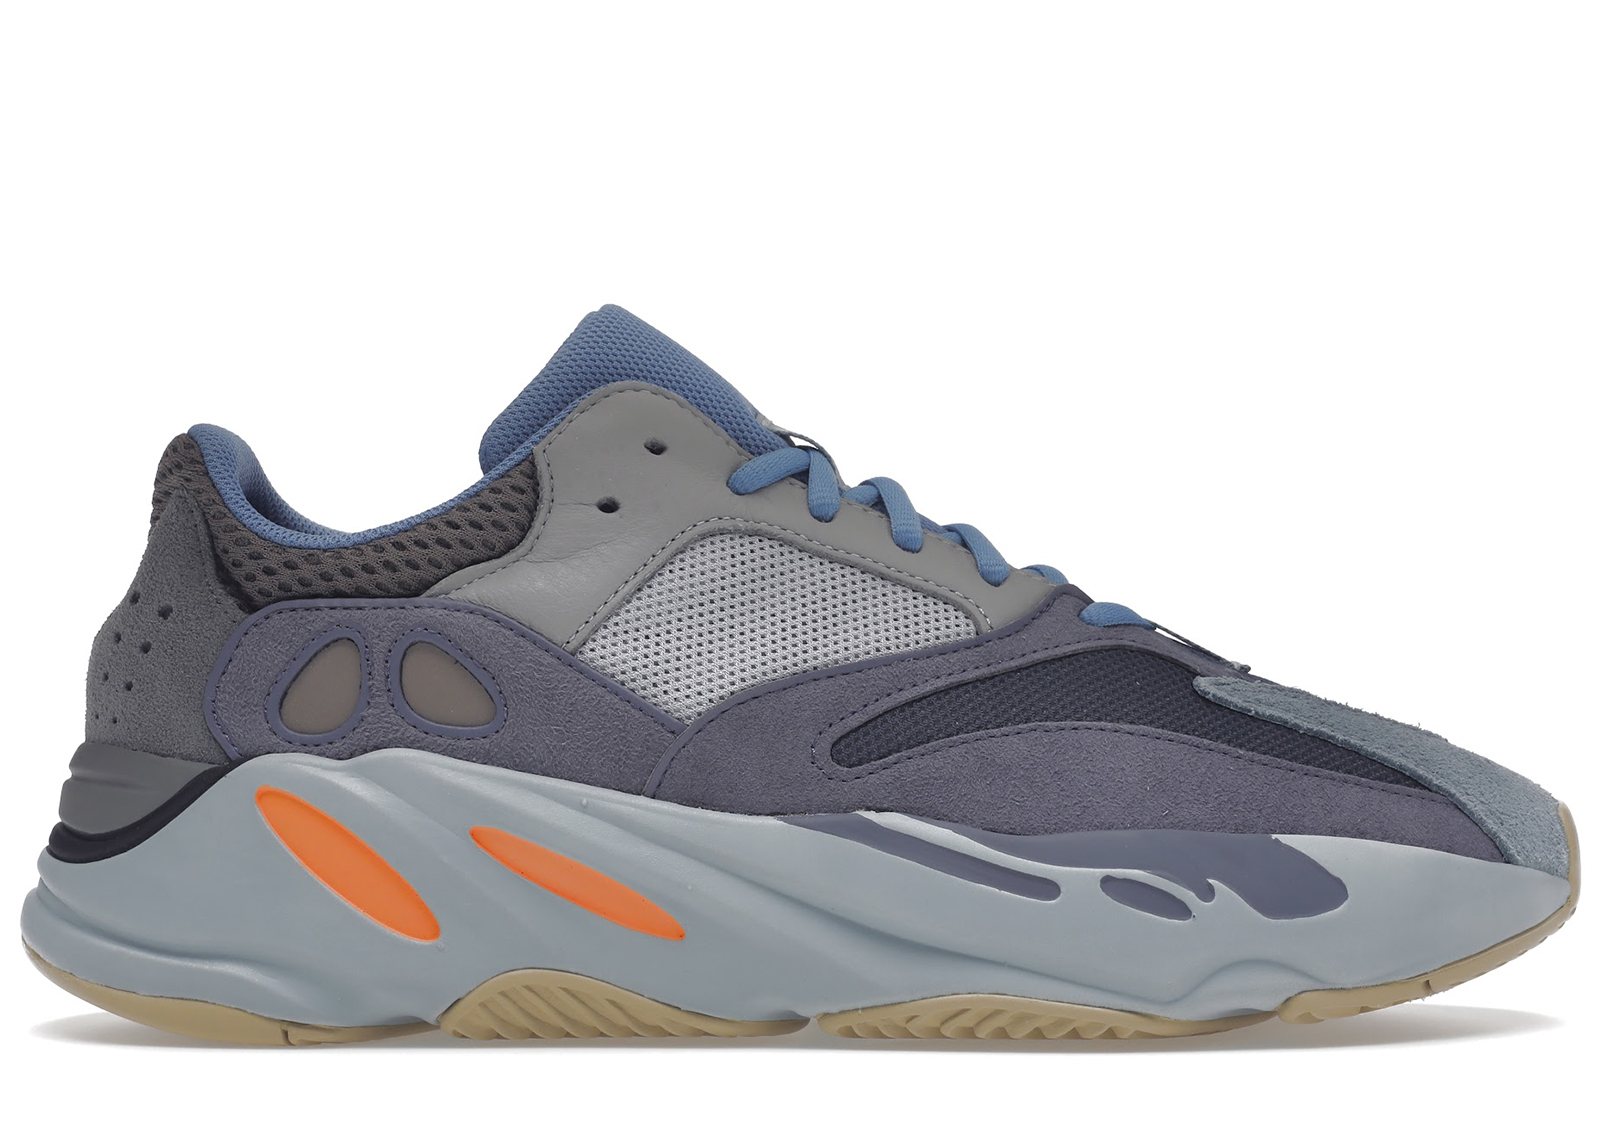 Buy adidas Yeezy 700 v1 Shoes & Deadstock Sneakers